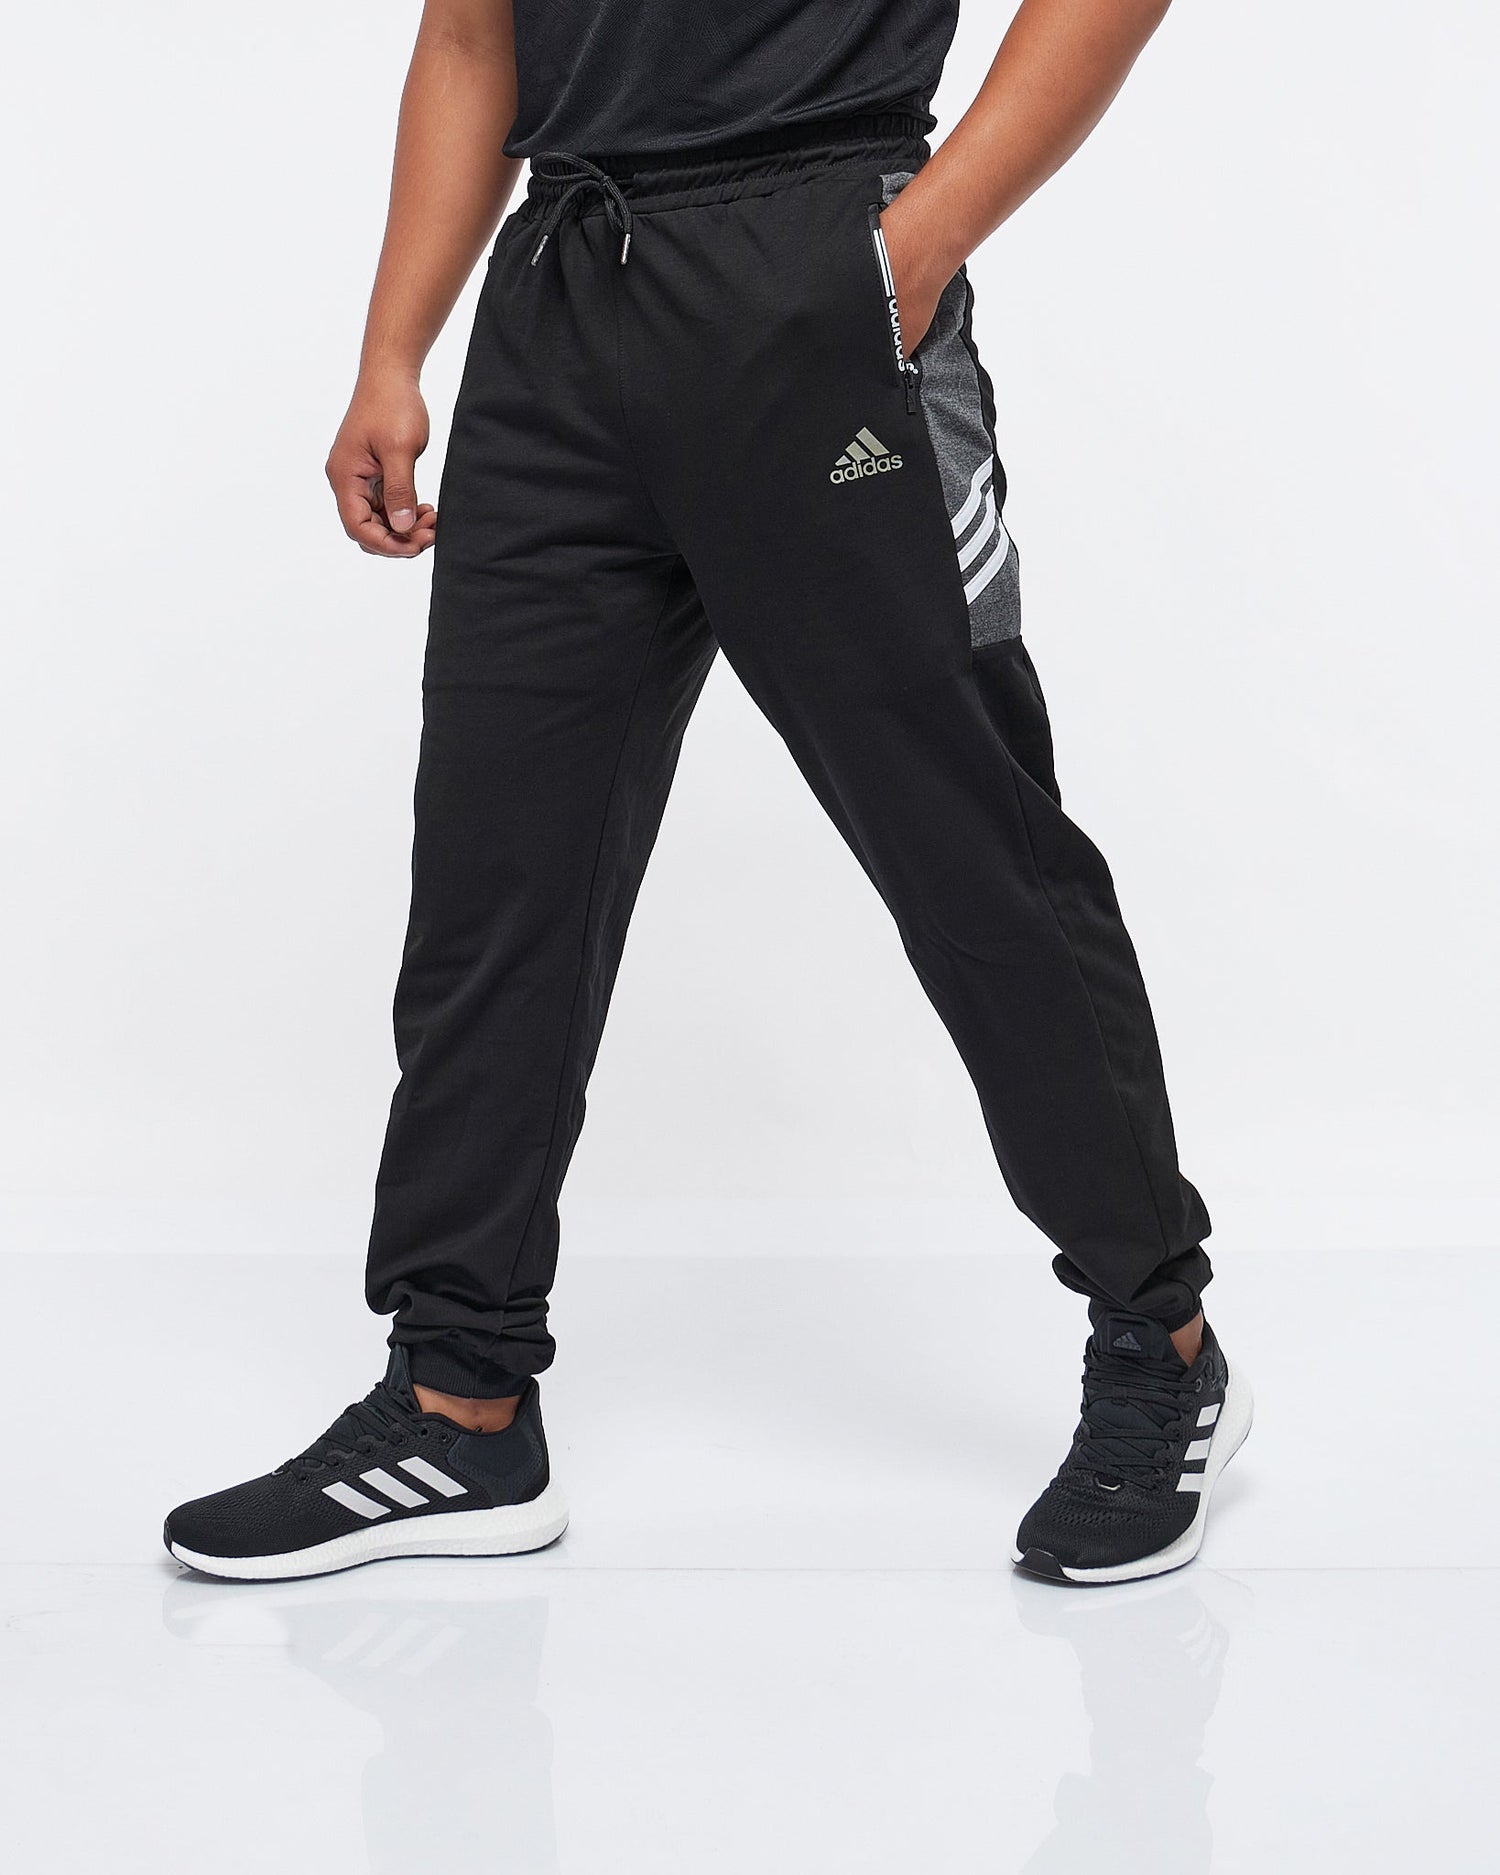 MOI OUTFIT-Half Side Striped Men Joggers 18.90